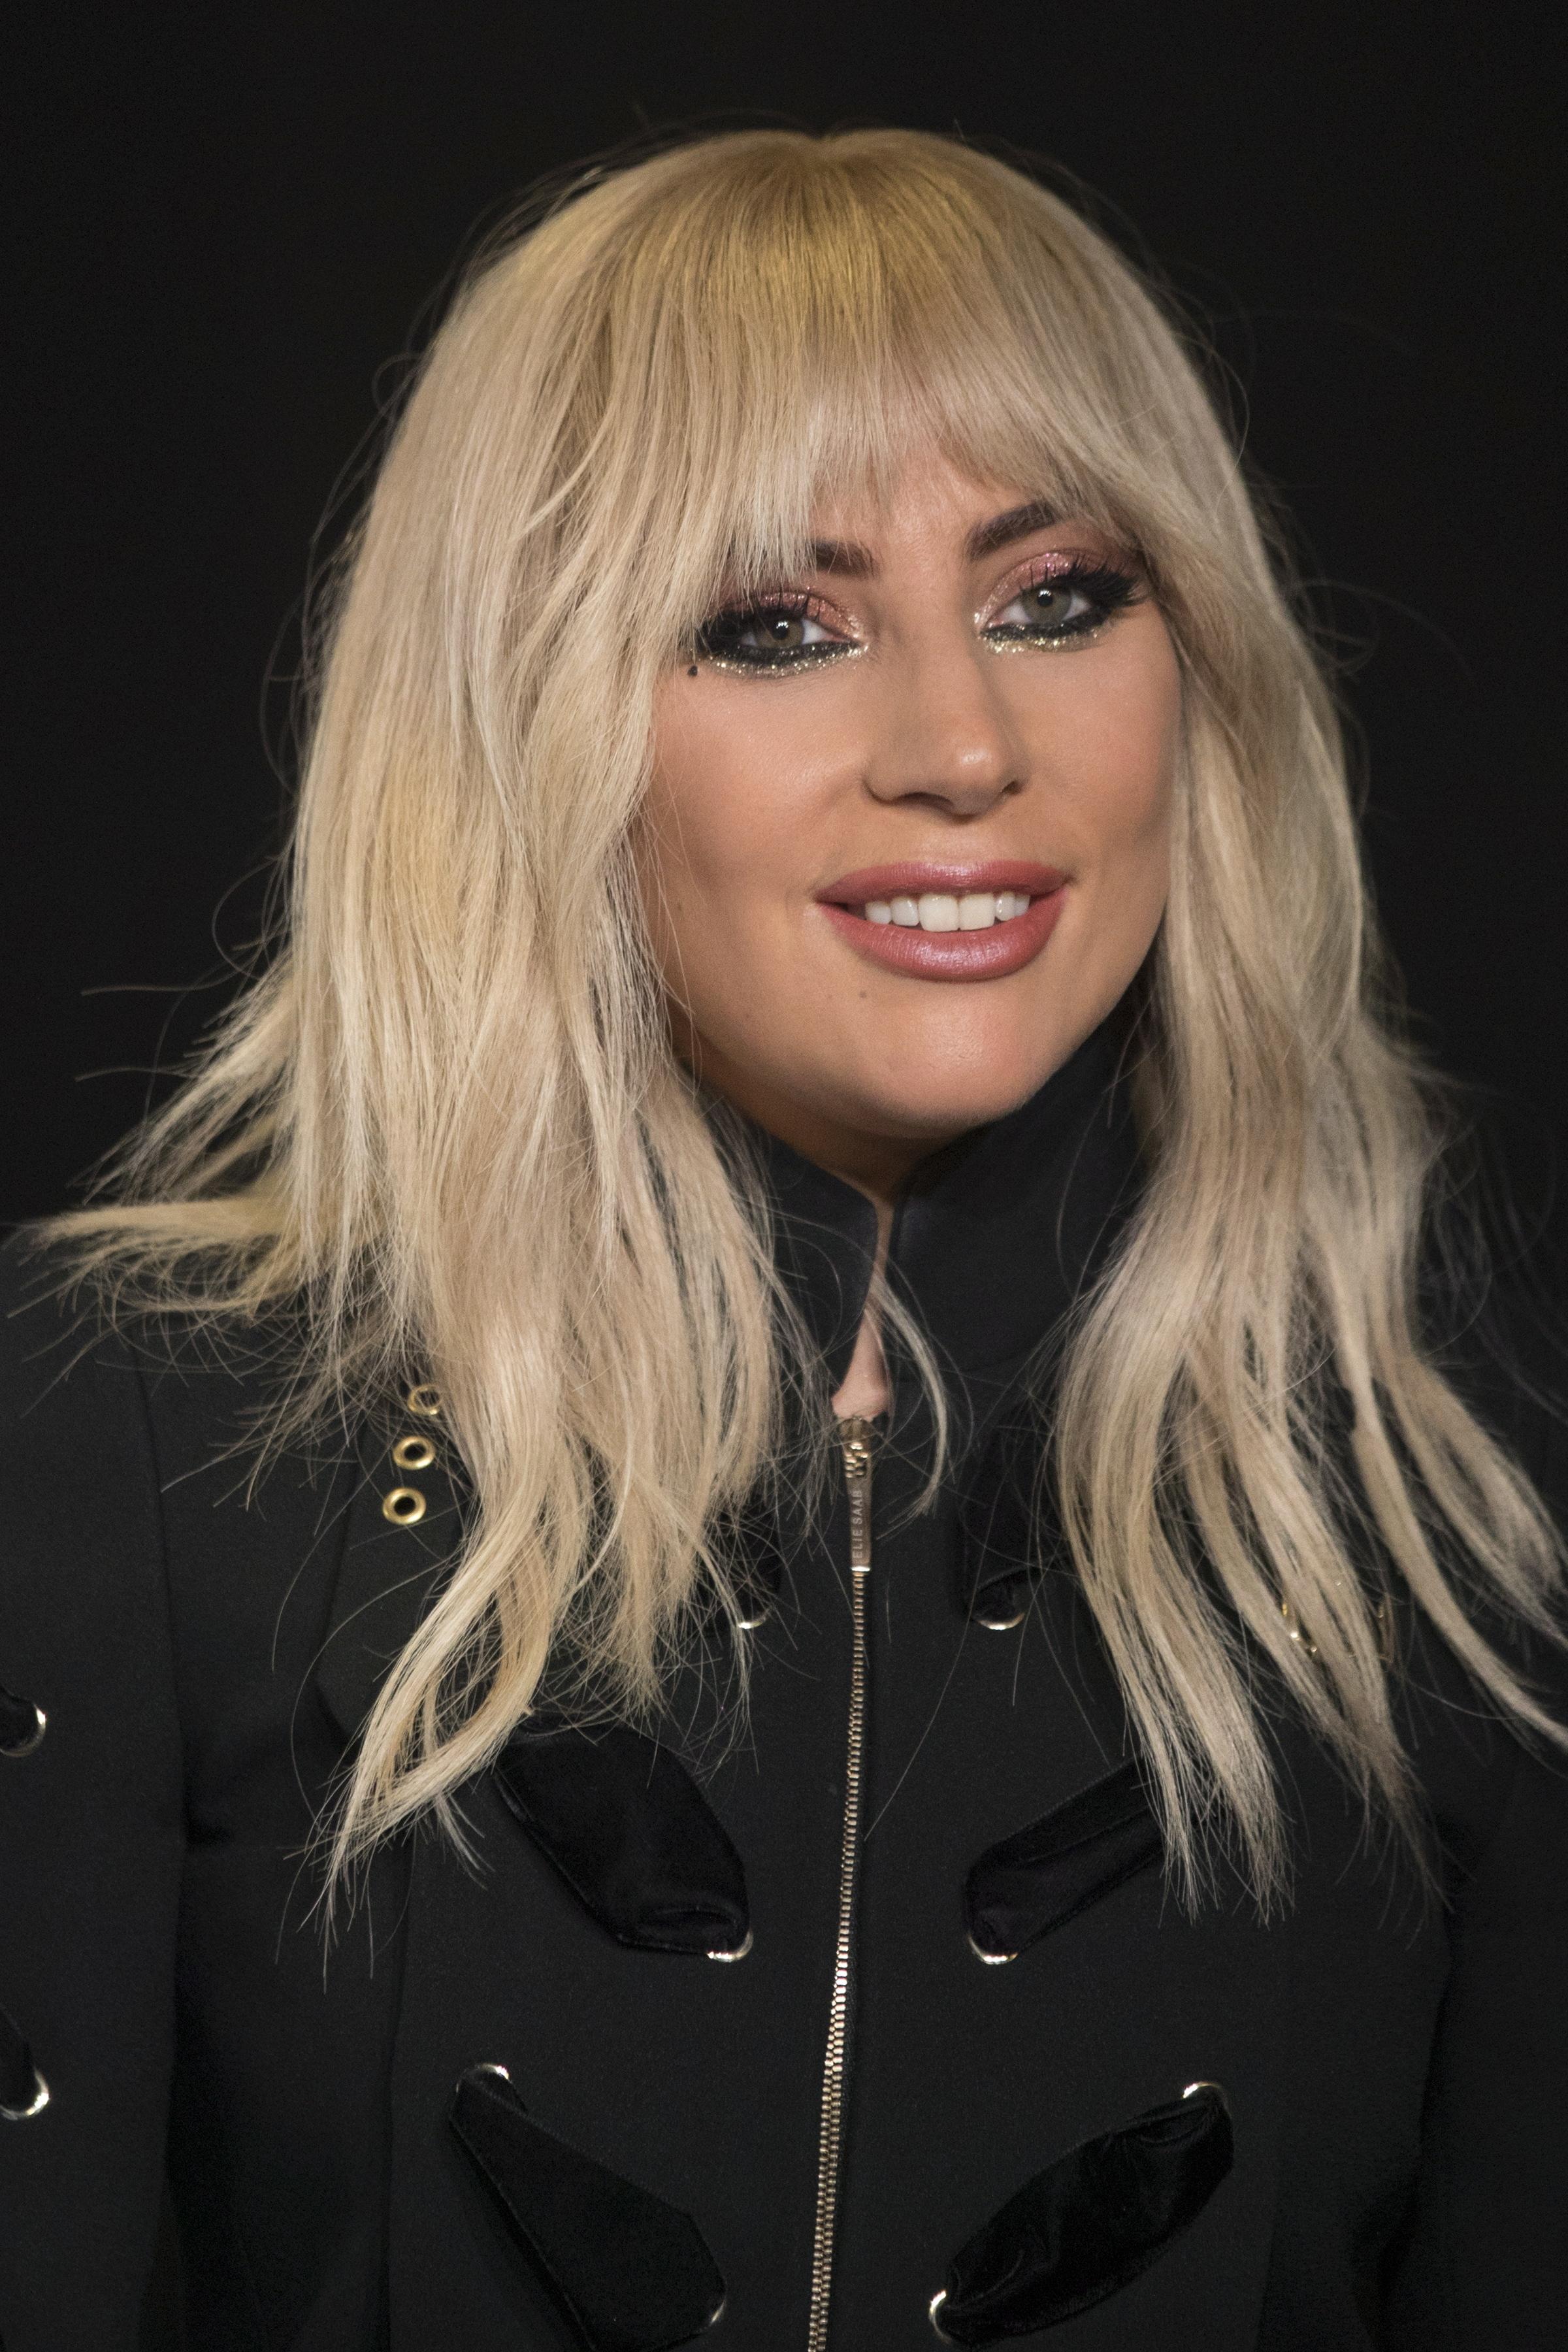 Lady Gaga says she’s taking a ‘rest’ from music The SpokesmanReview